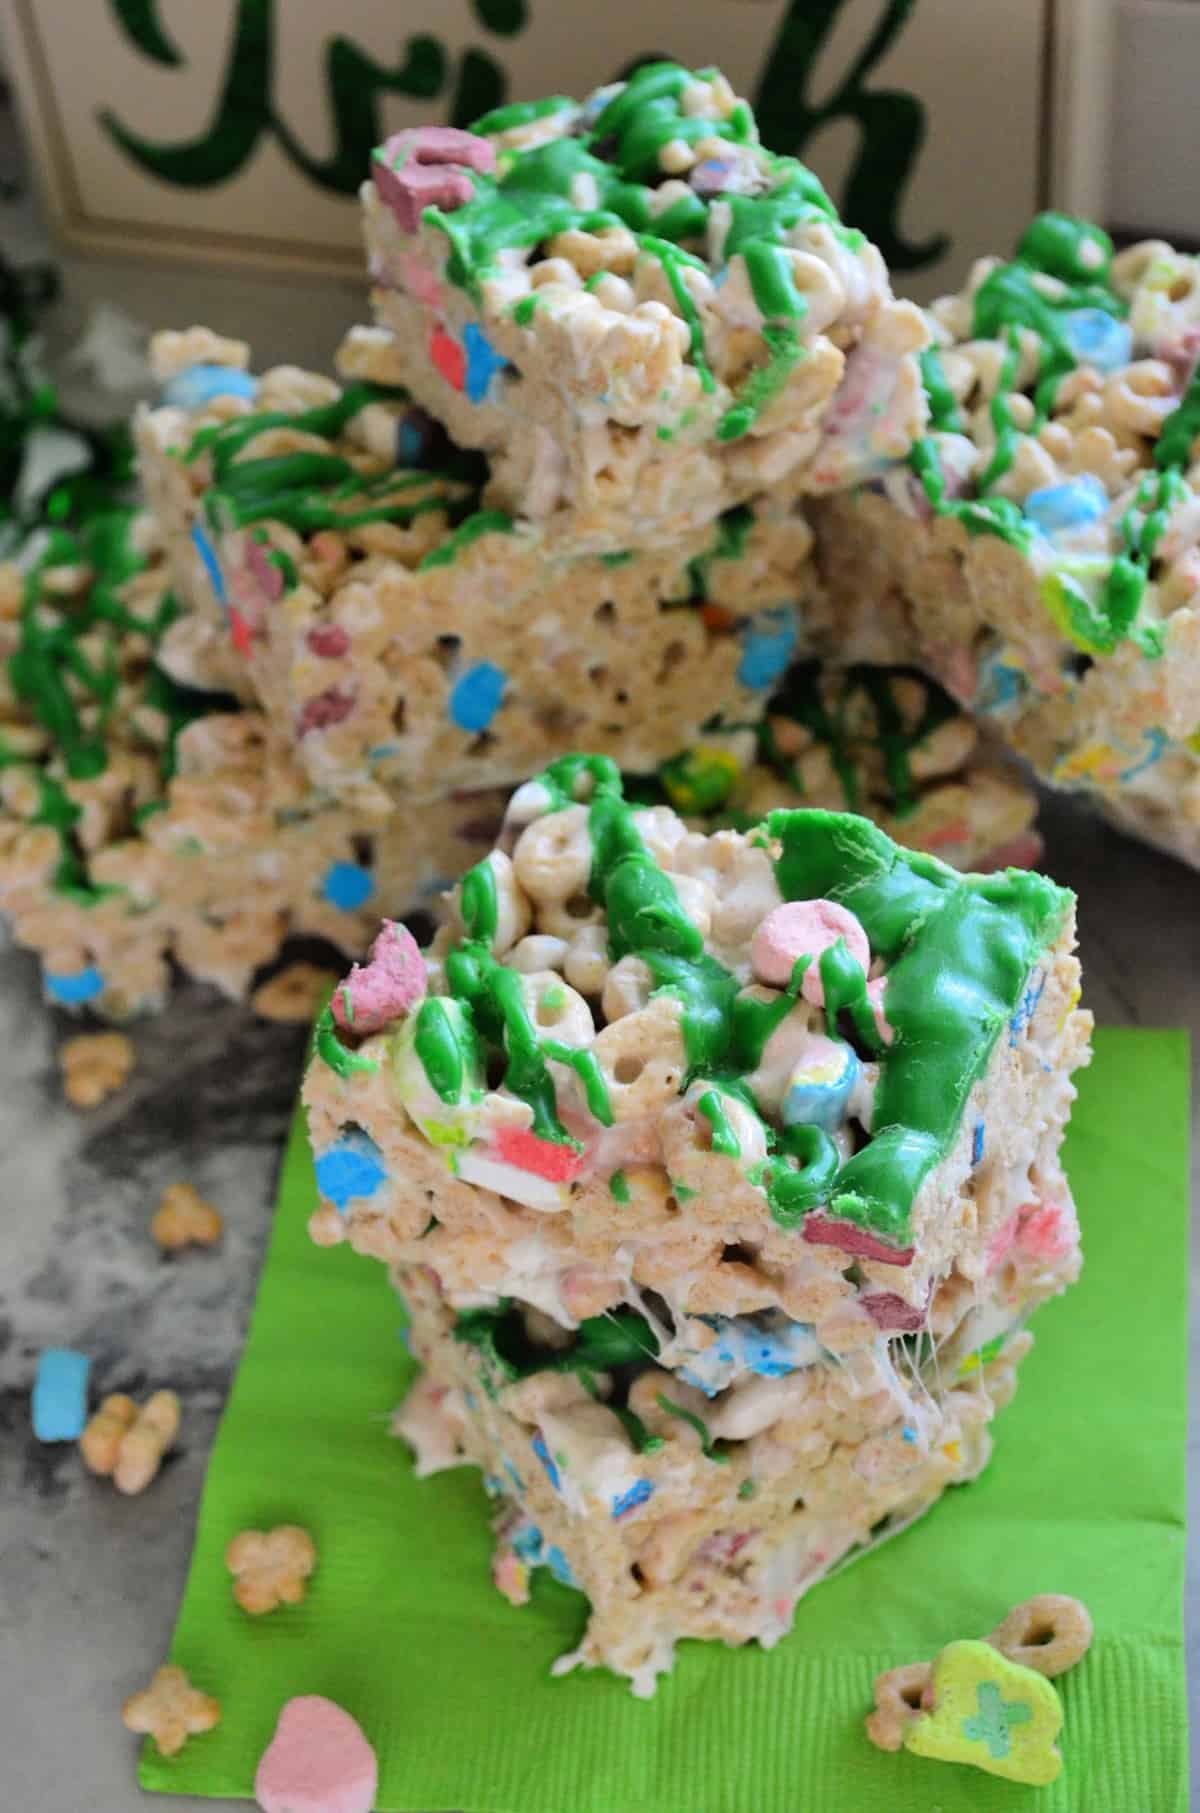 closeup of lucky charms cereal treats cut into cubes, drizzled with green chocolate, and stacked.